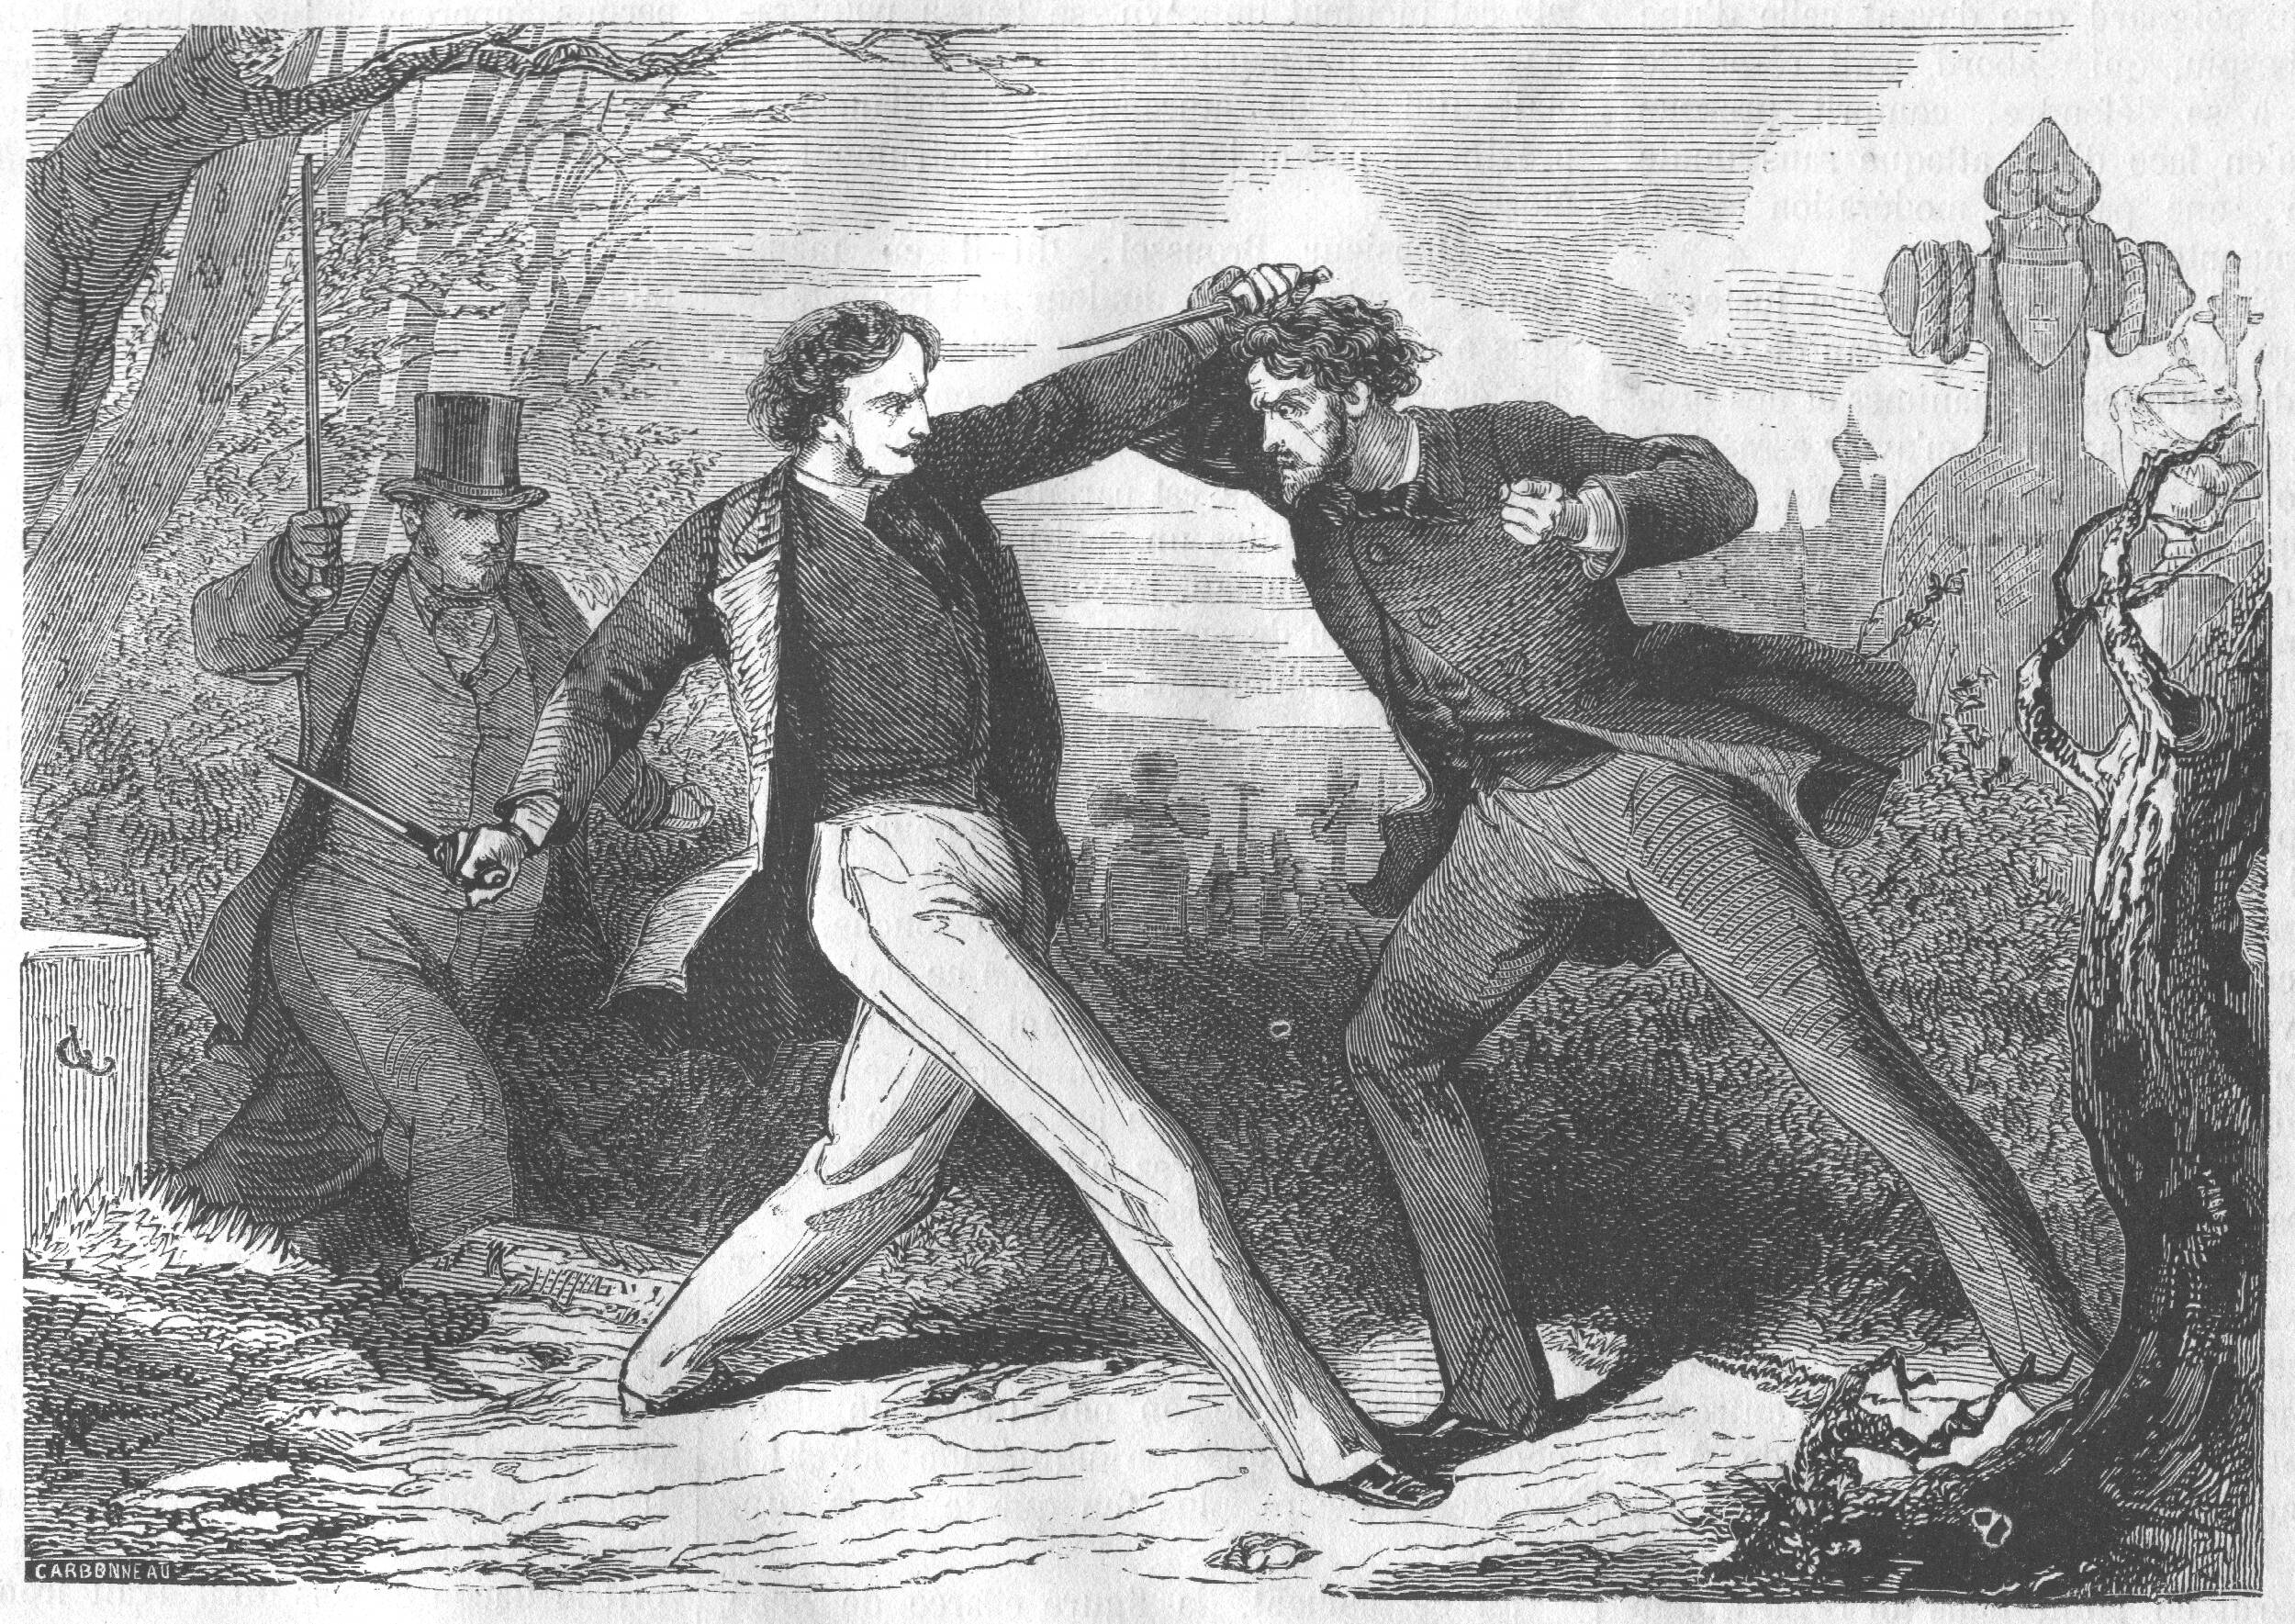 Fighting in the Graveyard – Old Book Illustrations